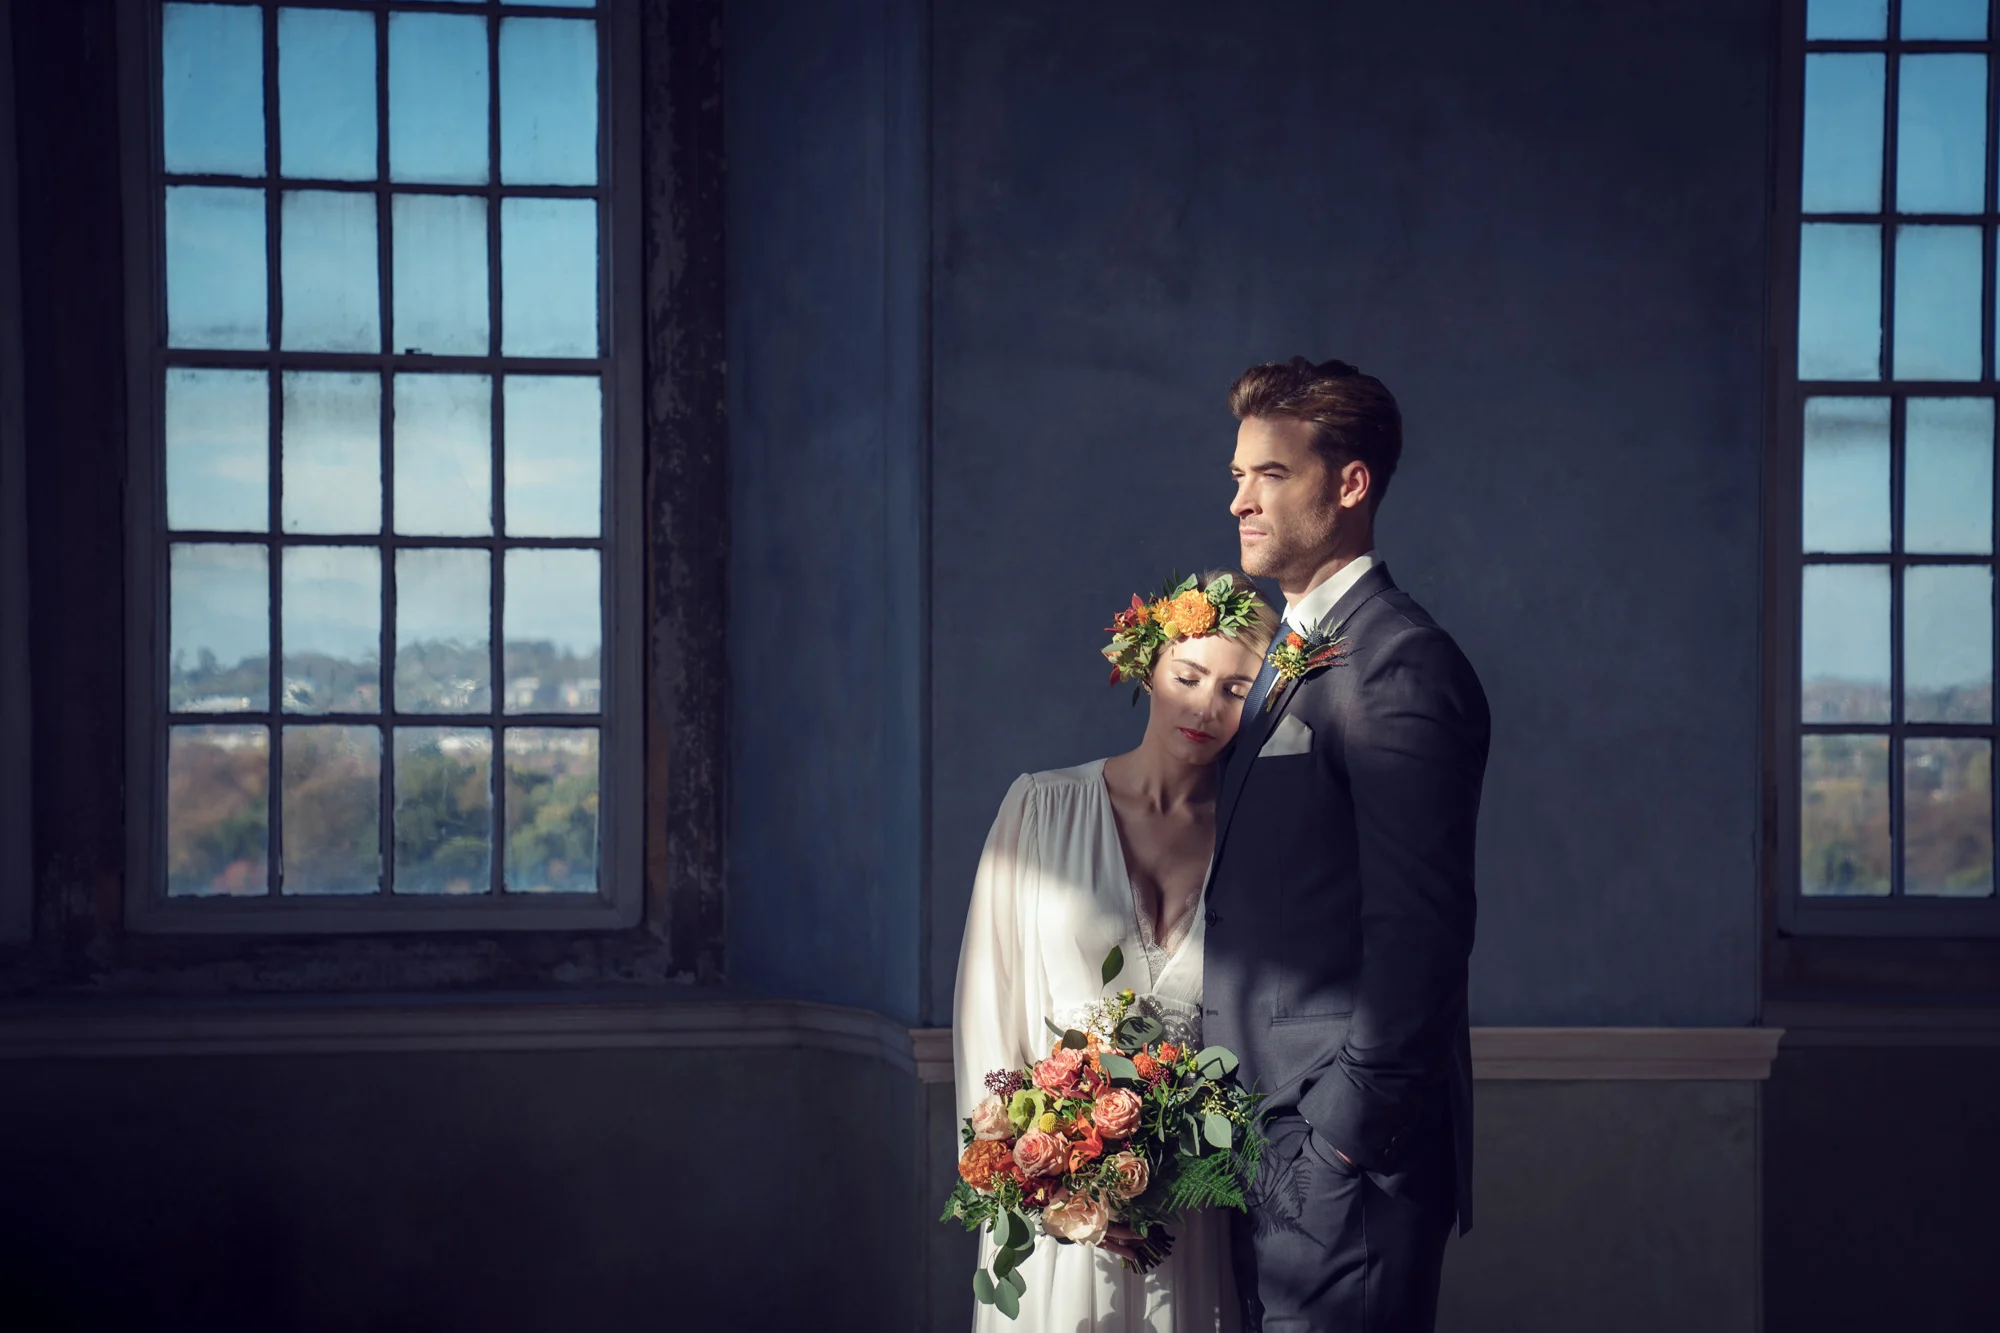 kate-hopewell-smith-sony-alpha-9-bride-and-groom-pose-formally-in-front-of-a-window-after-the-ceremony.webp